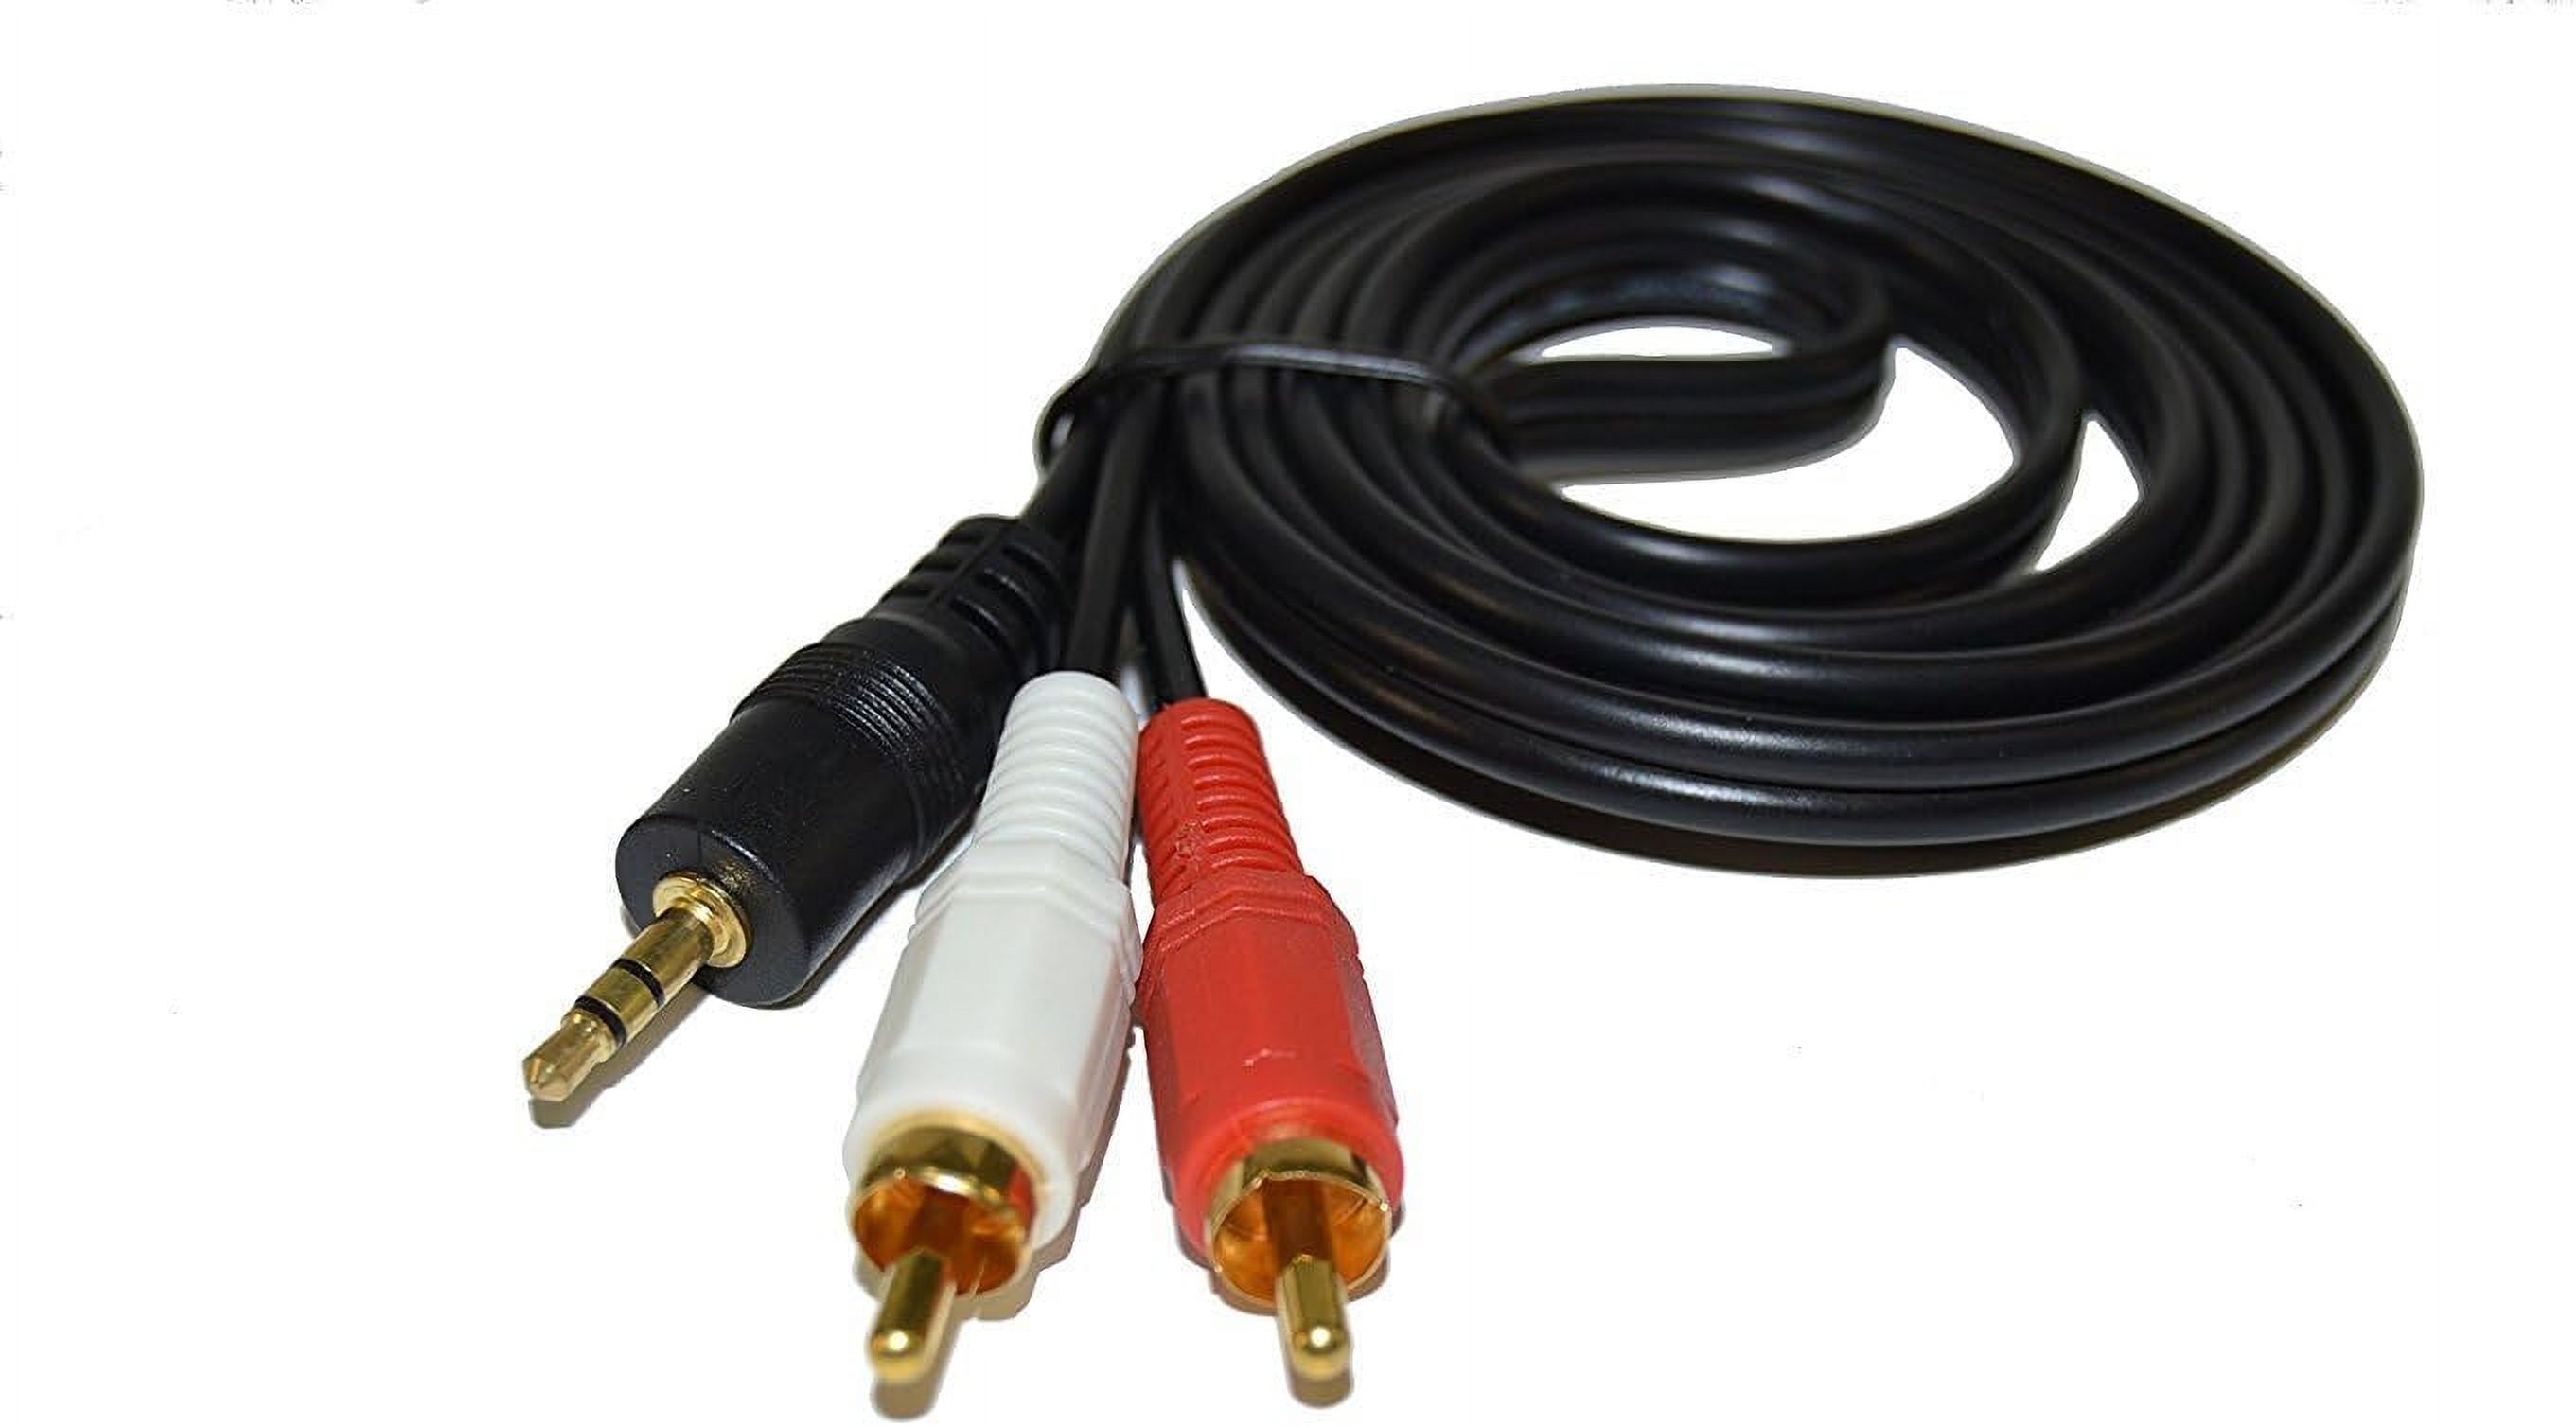 HQRP Stereo RCA to 3.5mm Audio Cable for Acoustic Research AWS73 / AW825 / AW851 Portable Wireless Speaker Transmitter Mini Plug Cord Y-Splitter 5ft - image 2 of 7